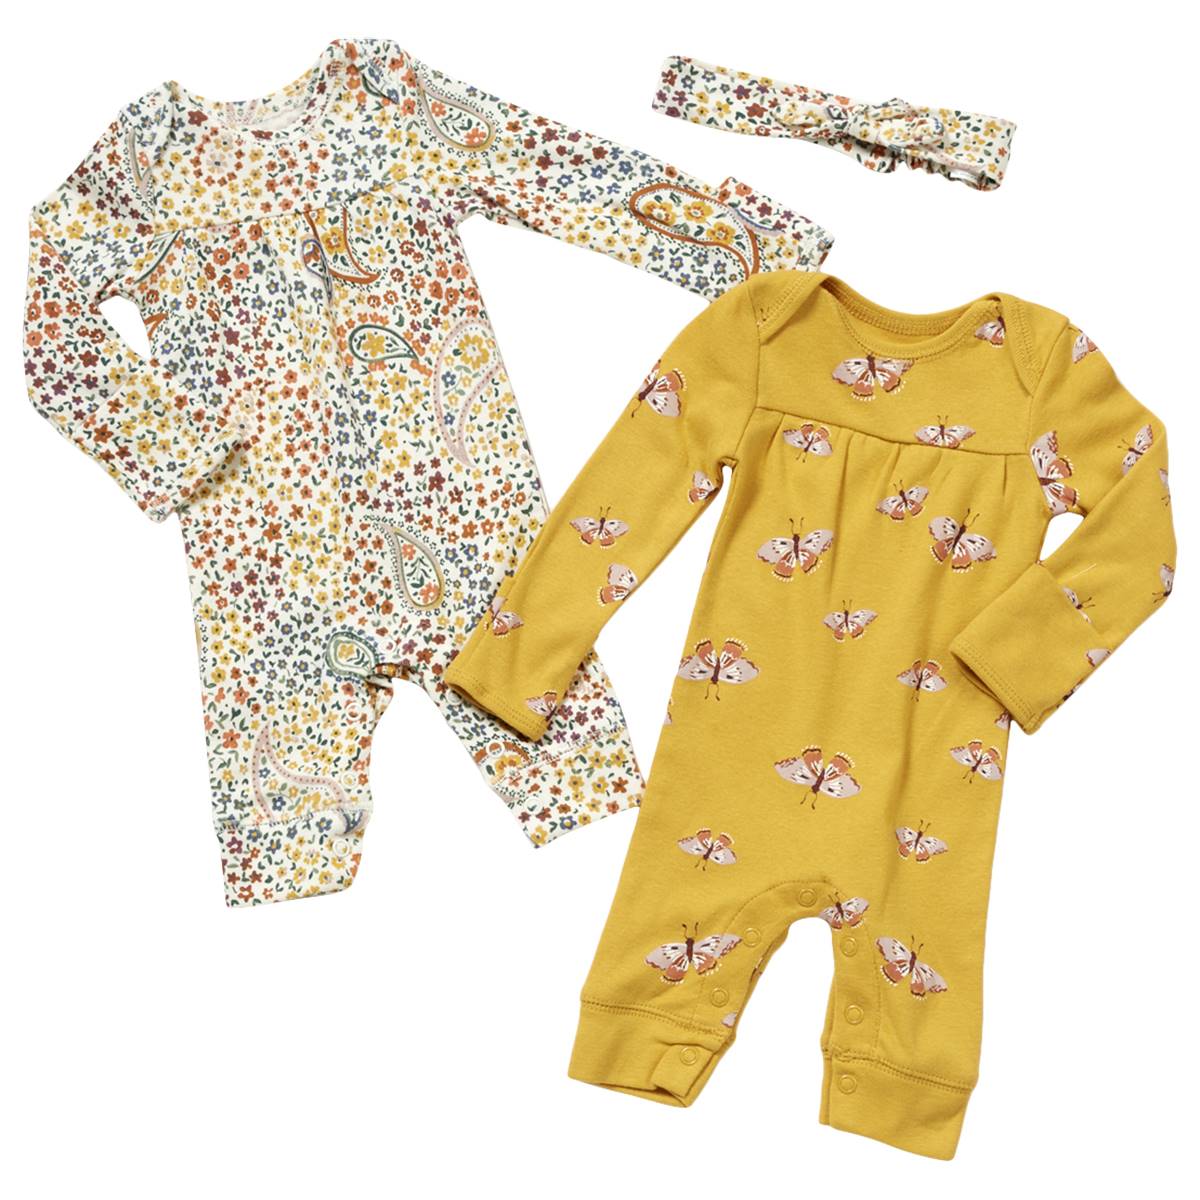 Baby Girl (NB-9M) Carter's(R) 2pk. Floral Jumpsuits & Headband